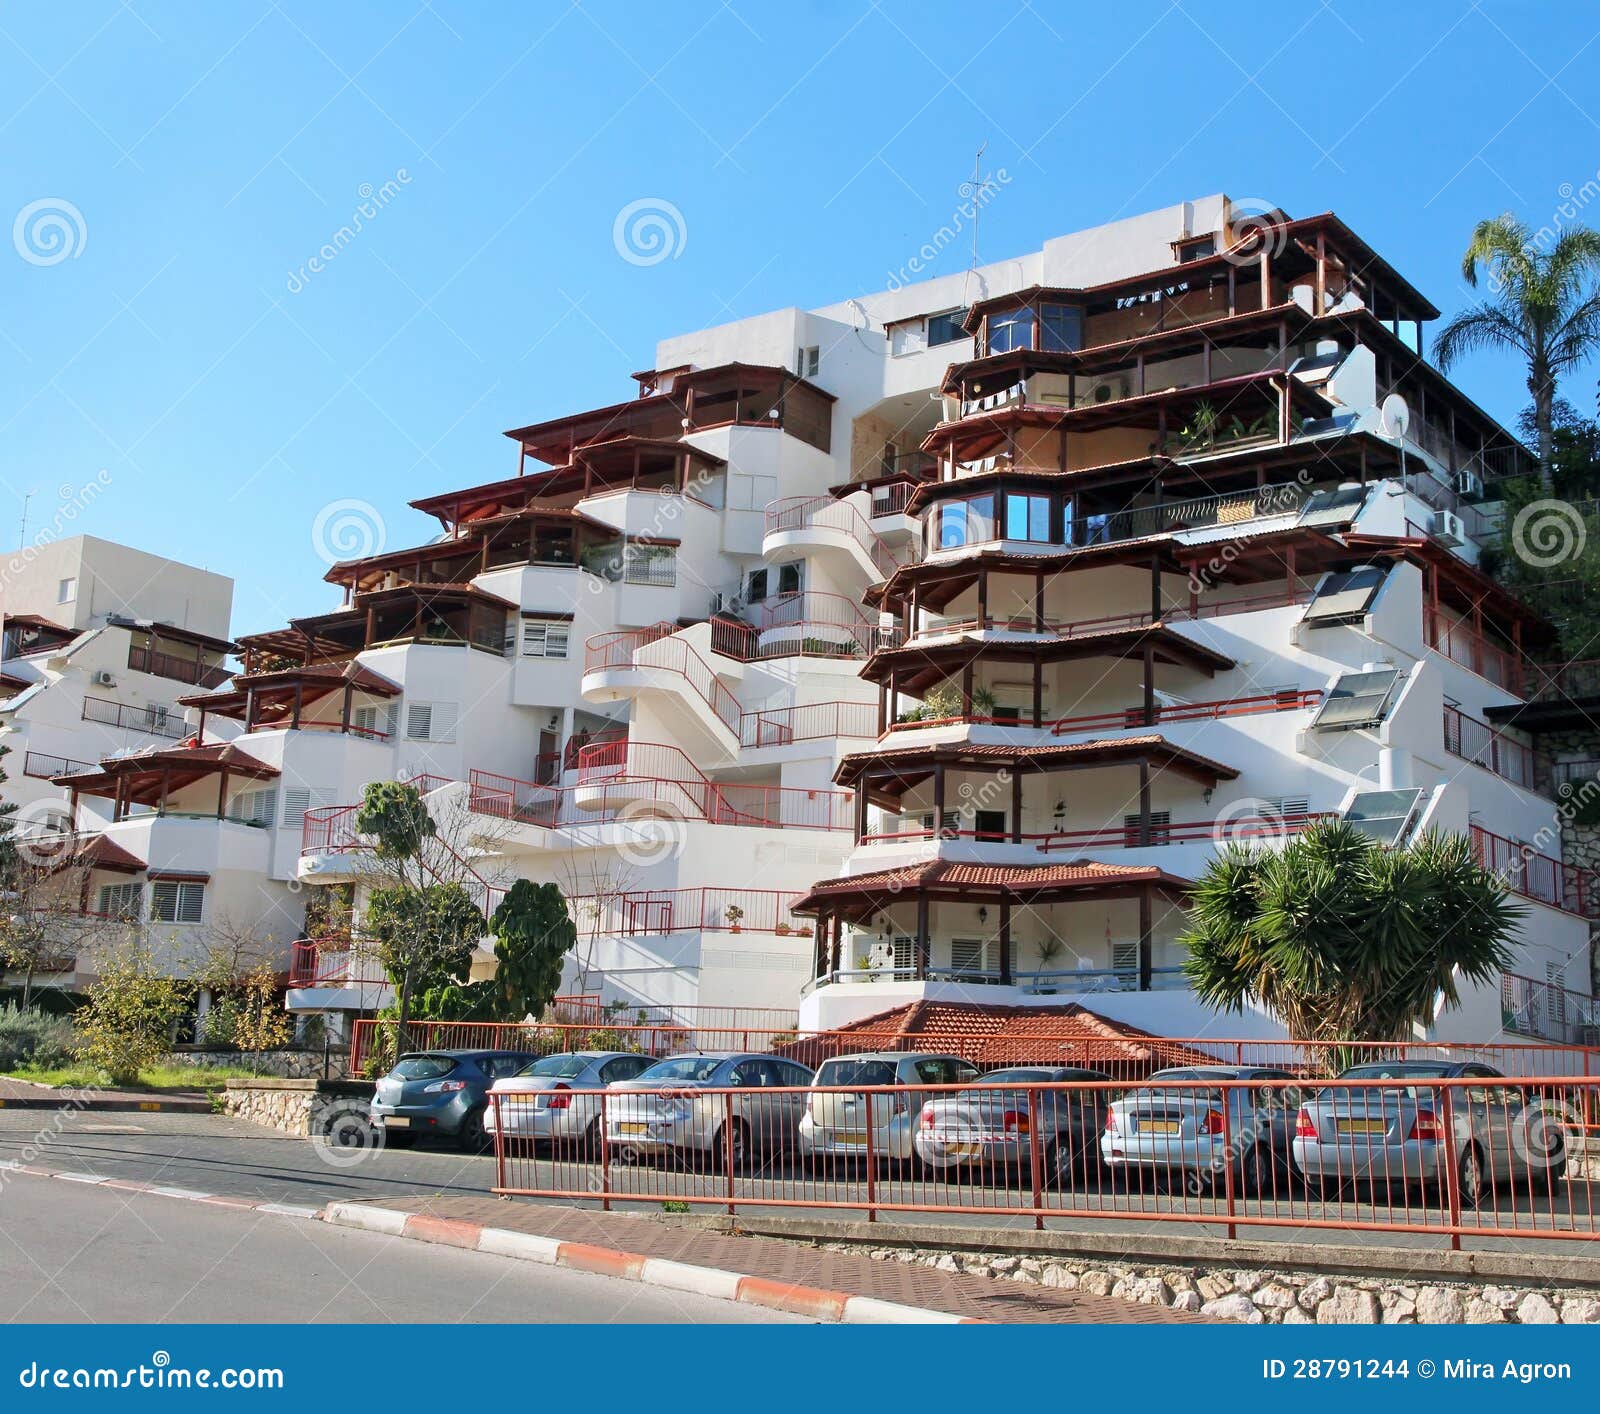 Modern Apartment Building Stock Images - Image: 28791244